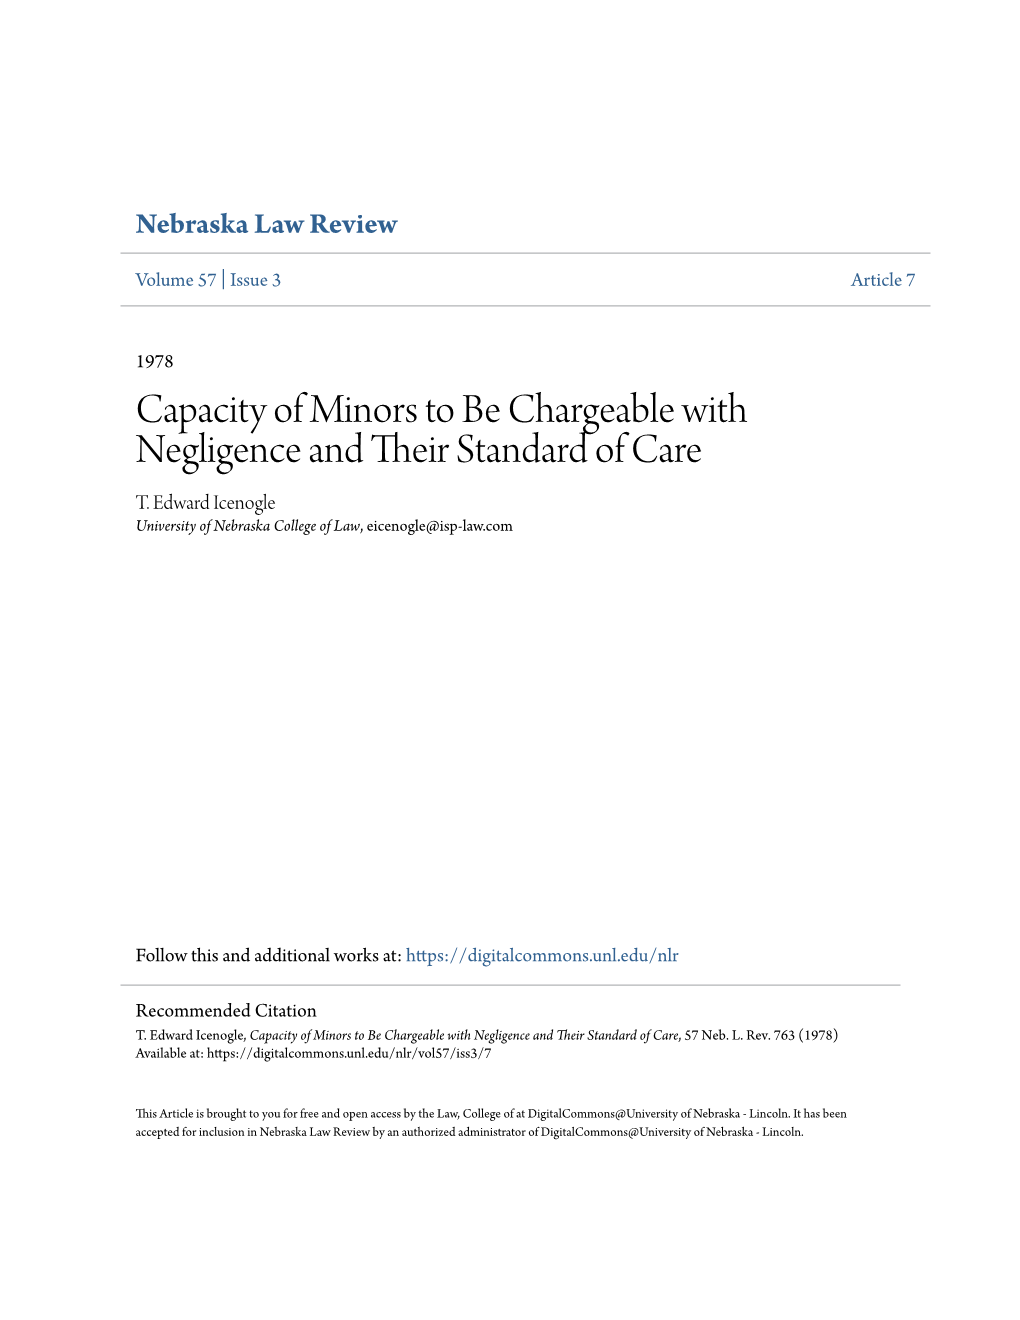 Capacity of Minors to Be Chargeable with Negligence and Their Ts Andard of Care T